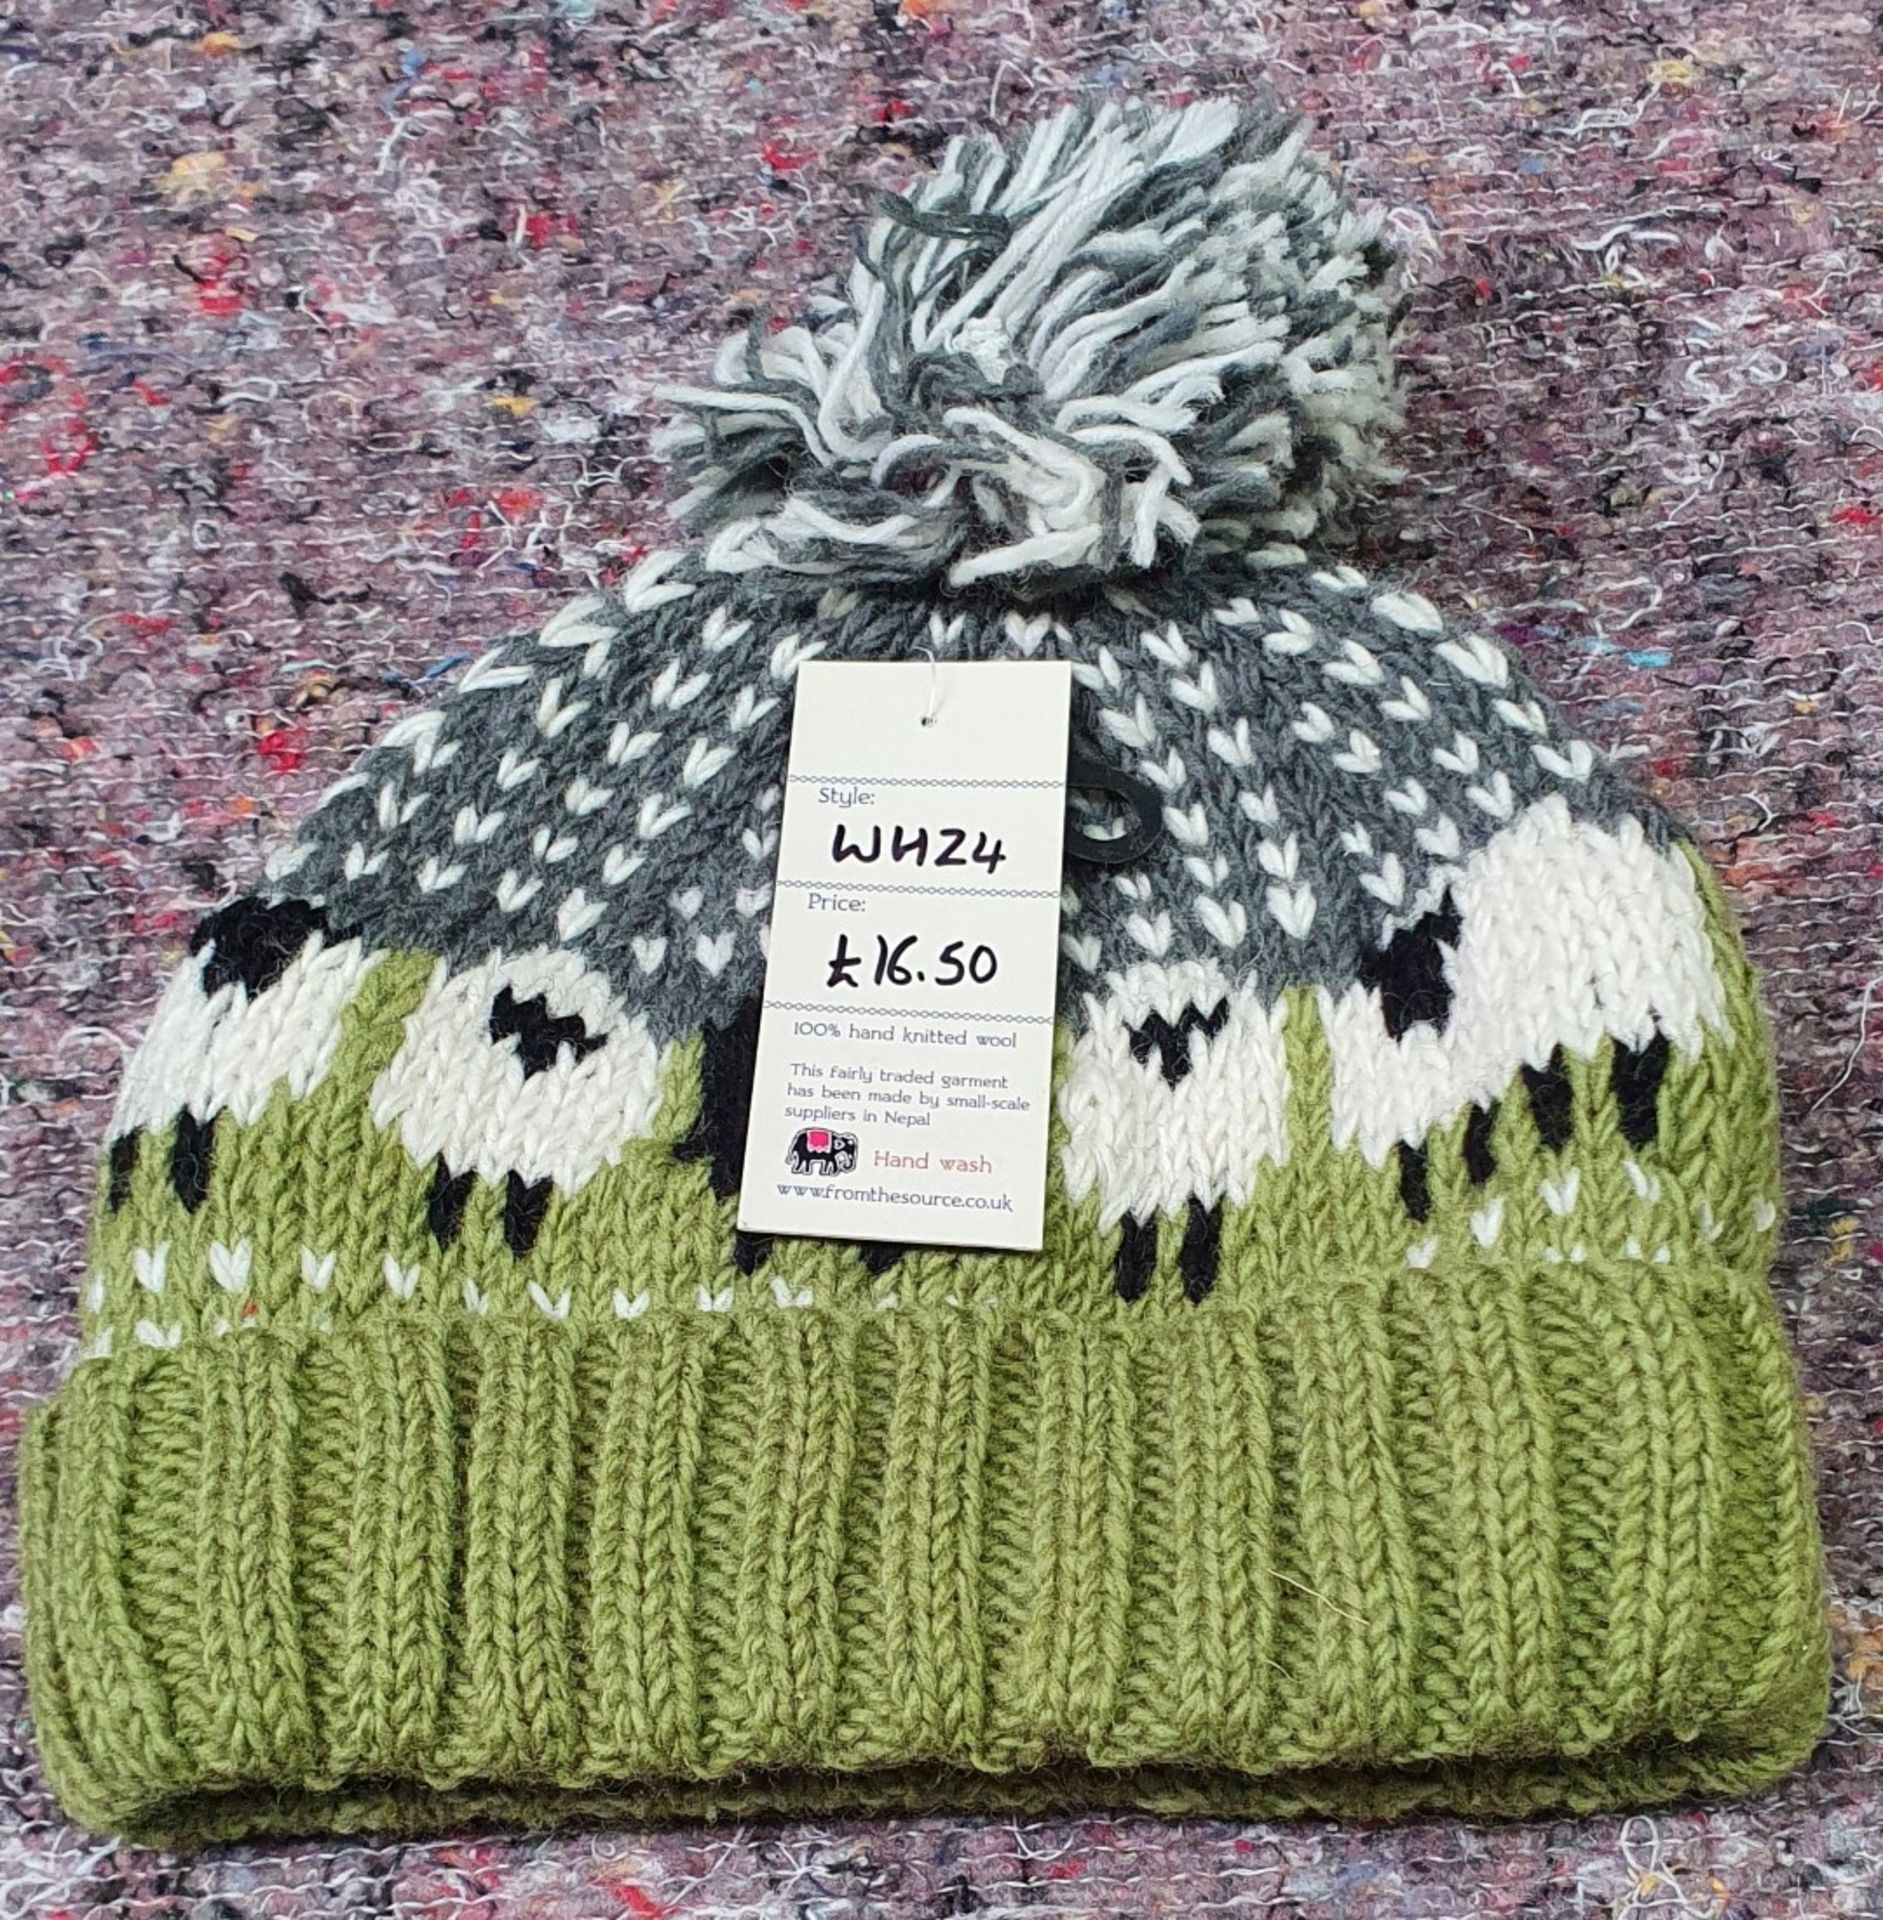 3 x Woolly Bobble Hats by From The Source - New Stock - RRP £49 - Ref: TCH237 - CL840 - Location: - Image 6 of 8